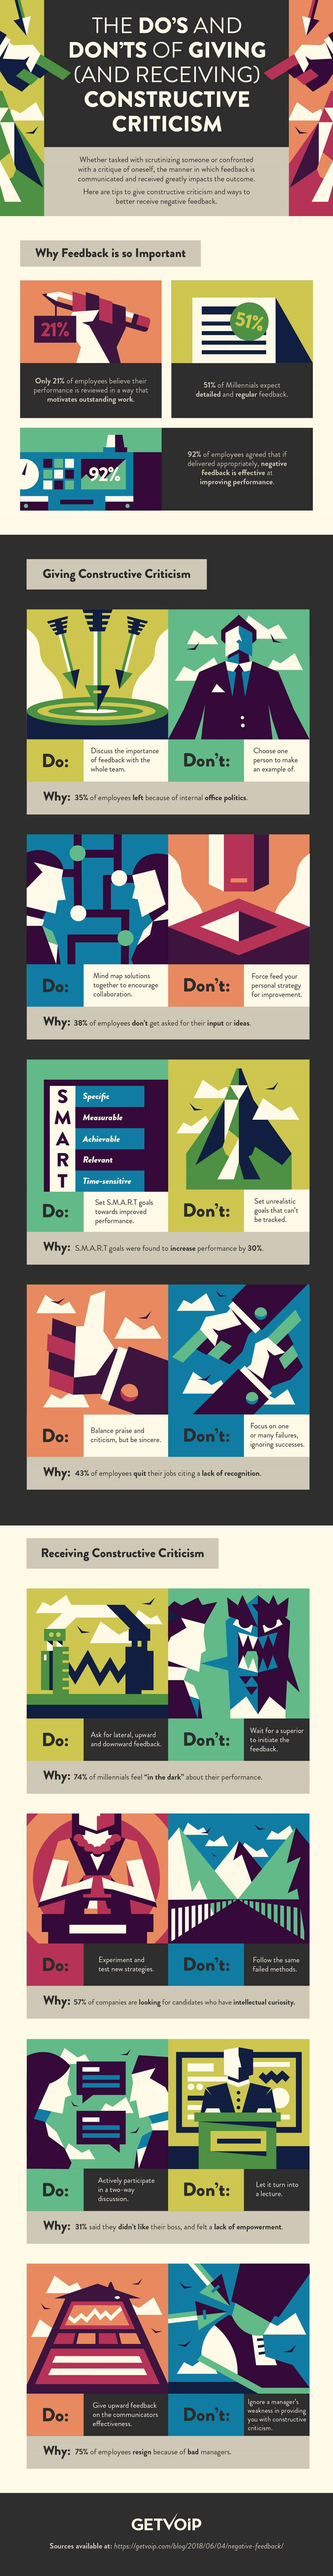 The 8 Commandments of Giving Constructive Criticism - infographic